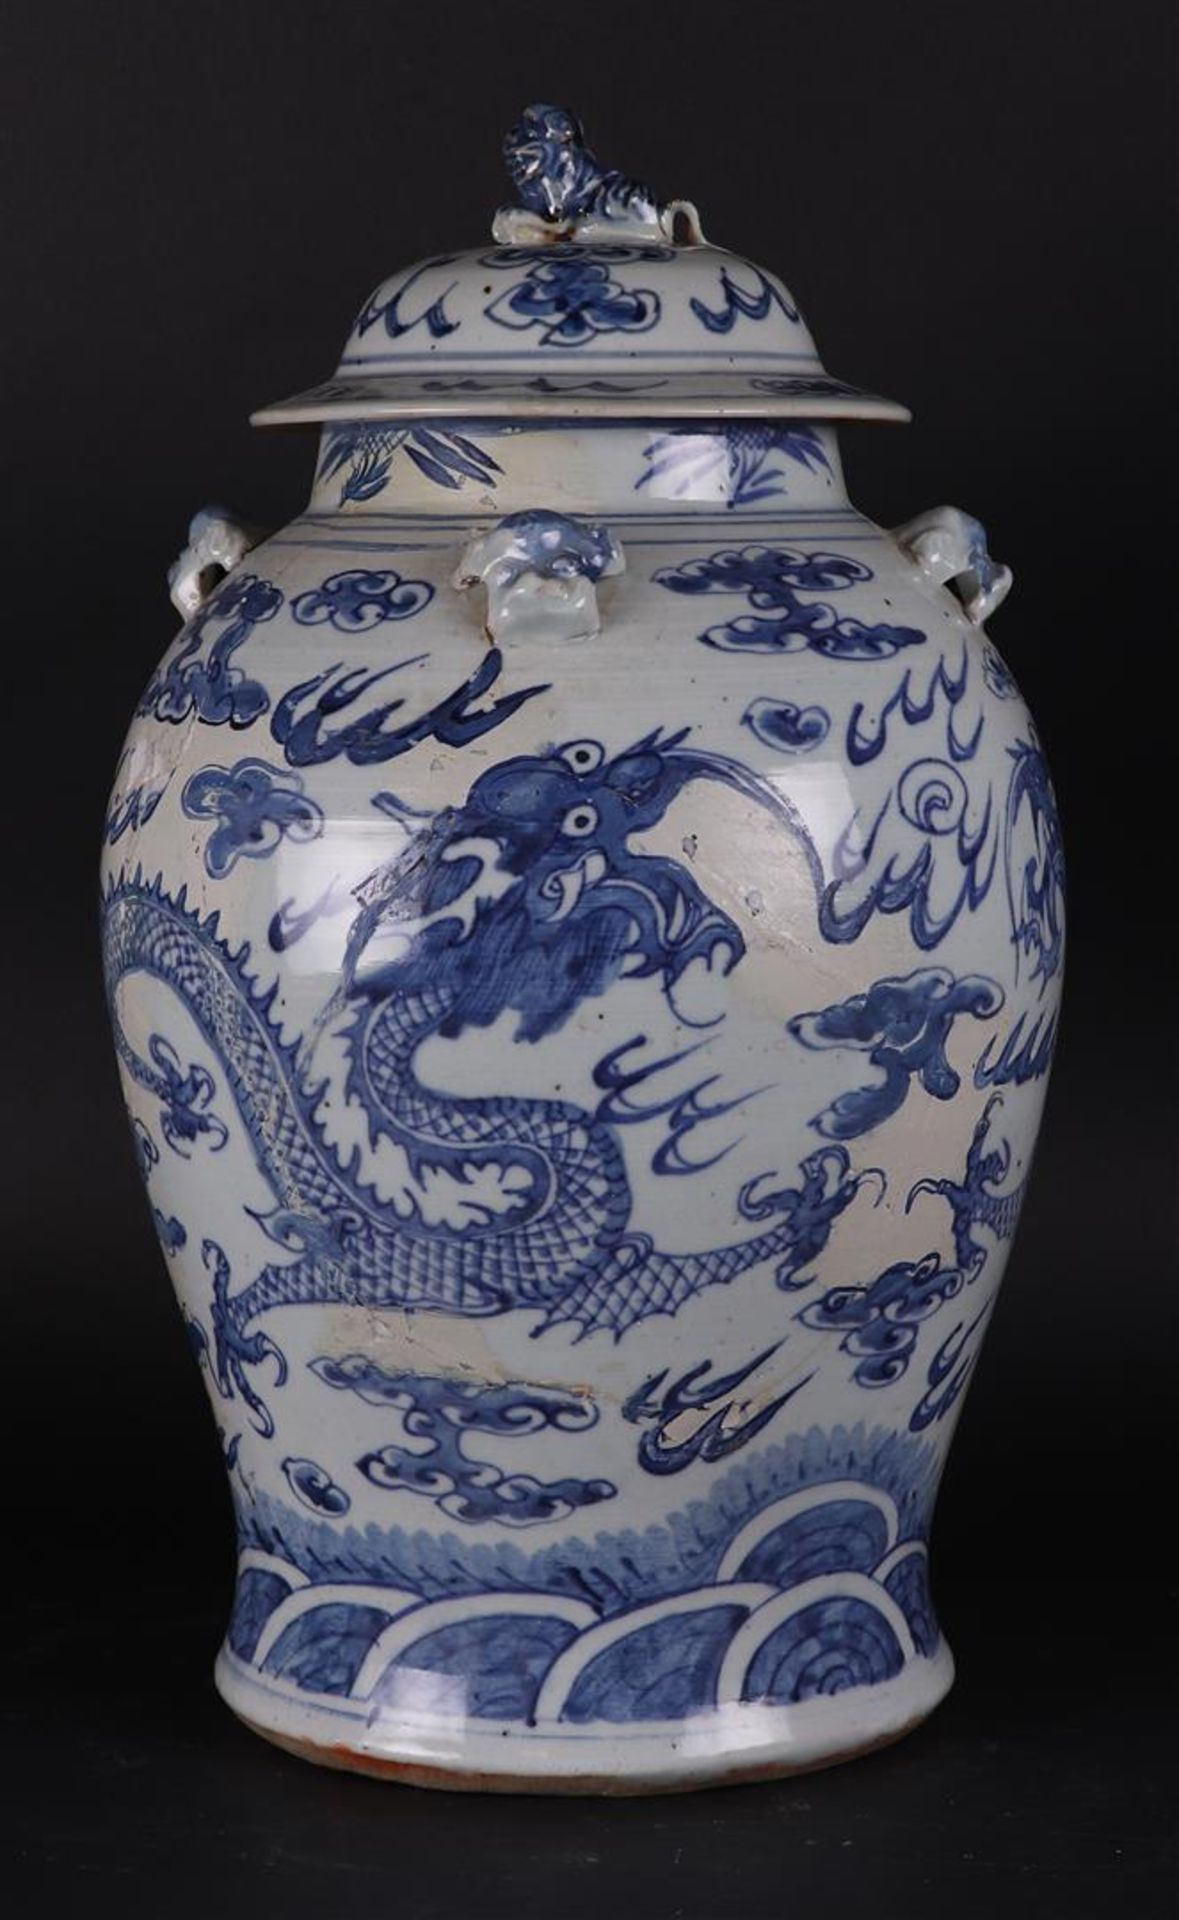 A large porcelain lidded vase decorated with dragons. China, 19th century.